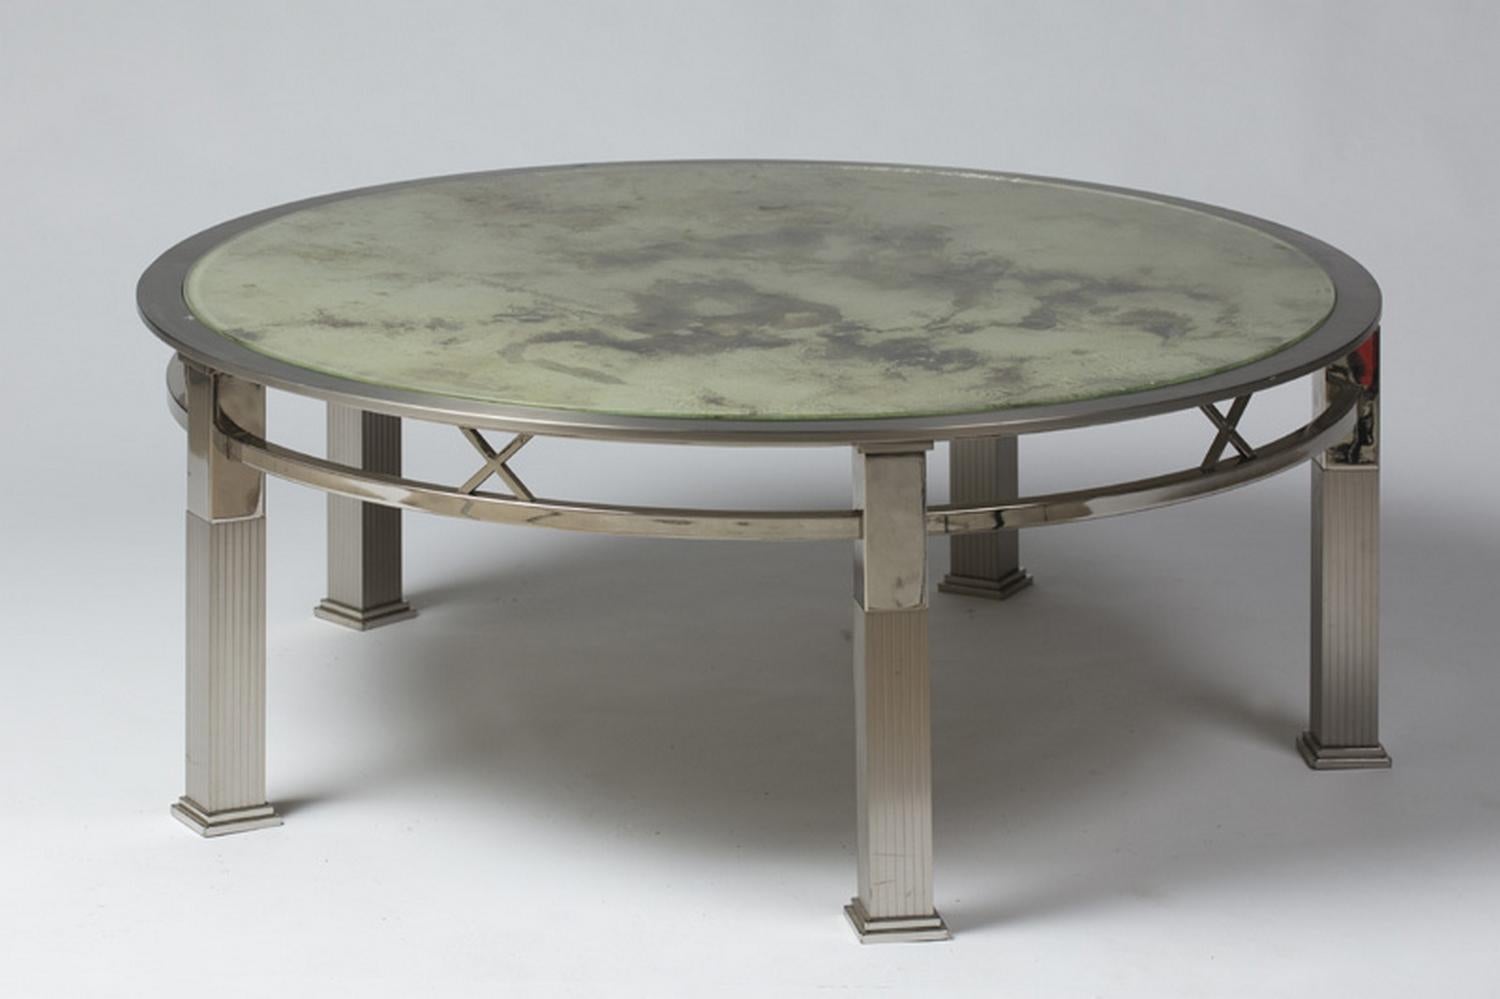 Round coffee table in chromed metal and acid-worked glass, France, 1970 period.
Quality work, in the spirit of Maison Jansen.

   